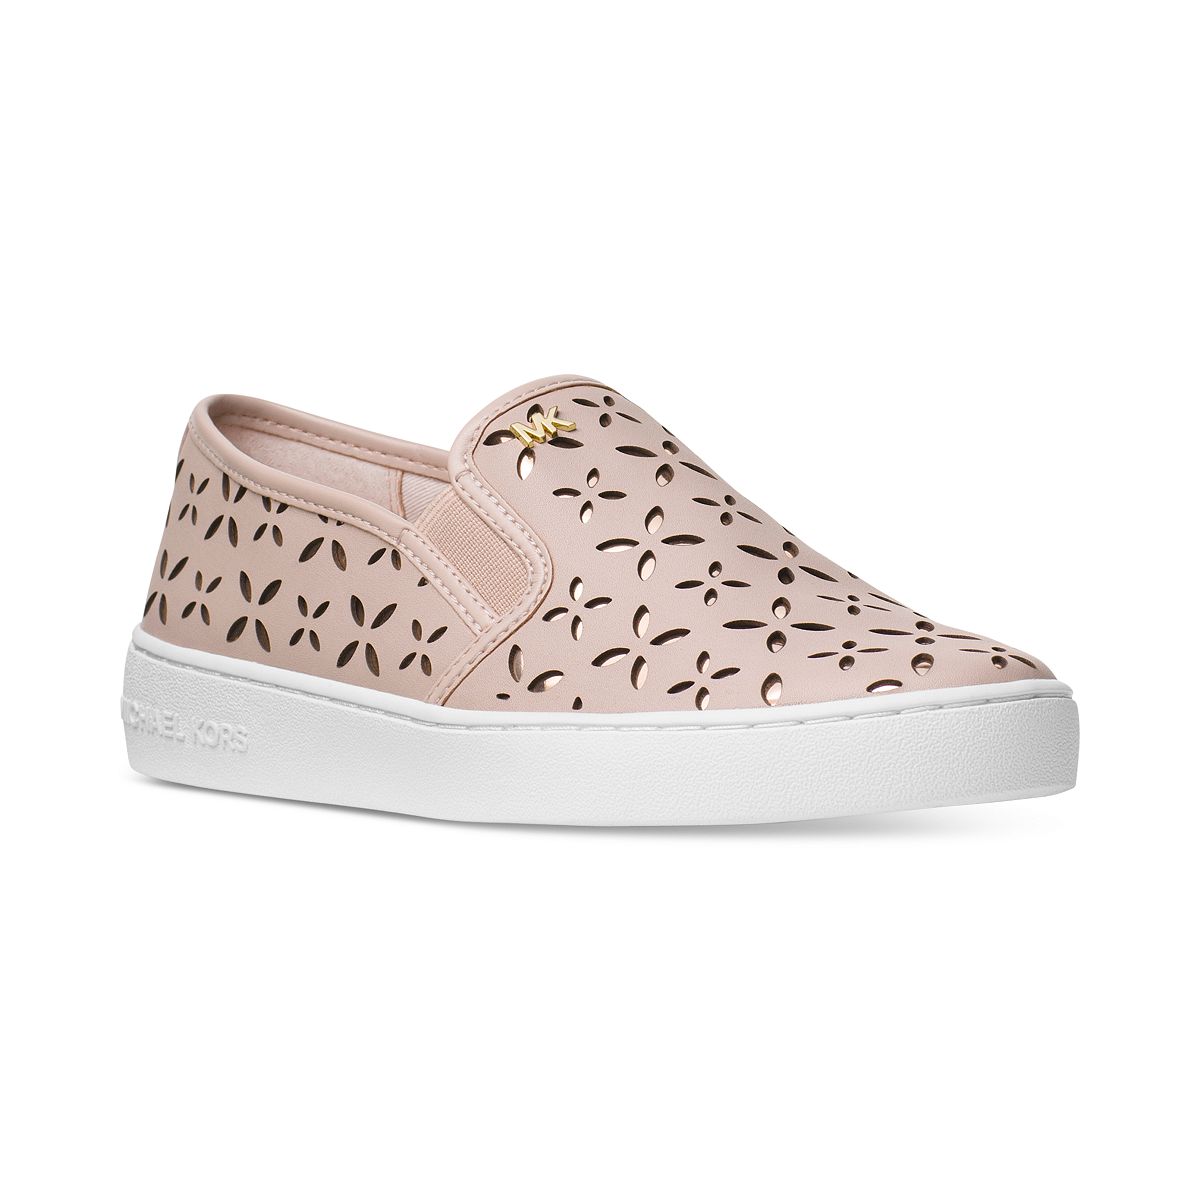 MICHAEL Michael Kors Outet Keaton Floral Perforated Slip-On Sneakers Soft Pink